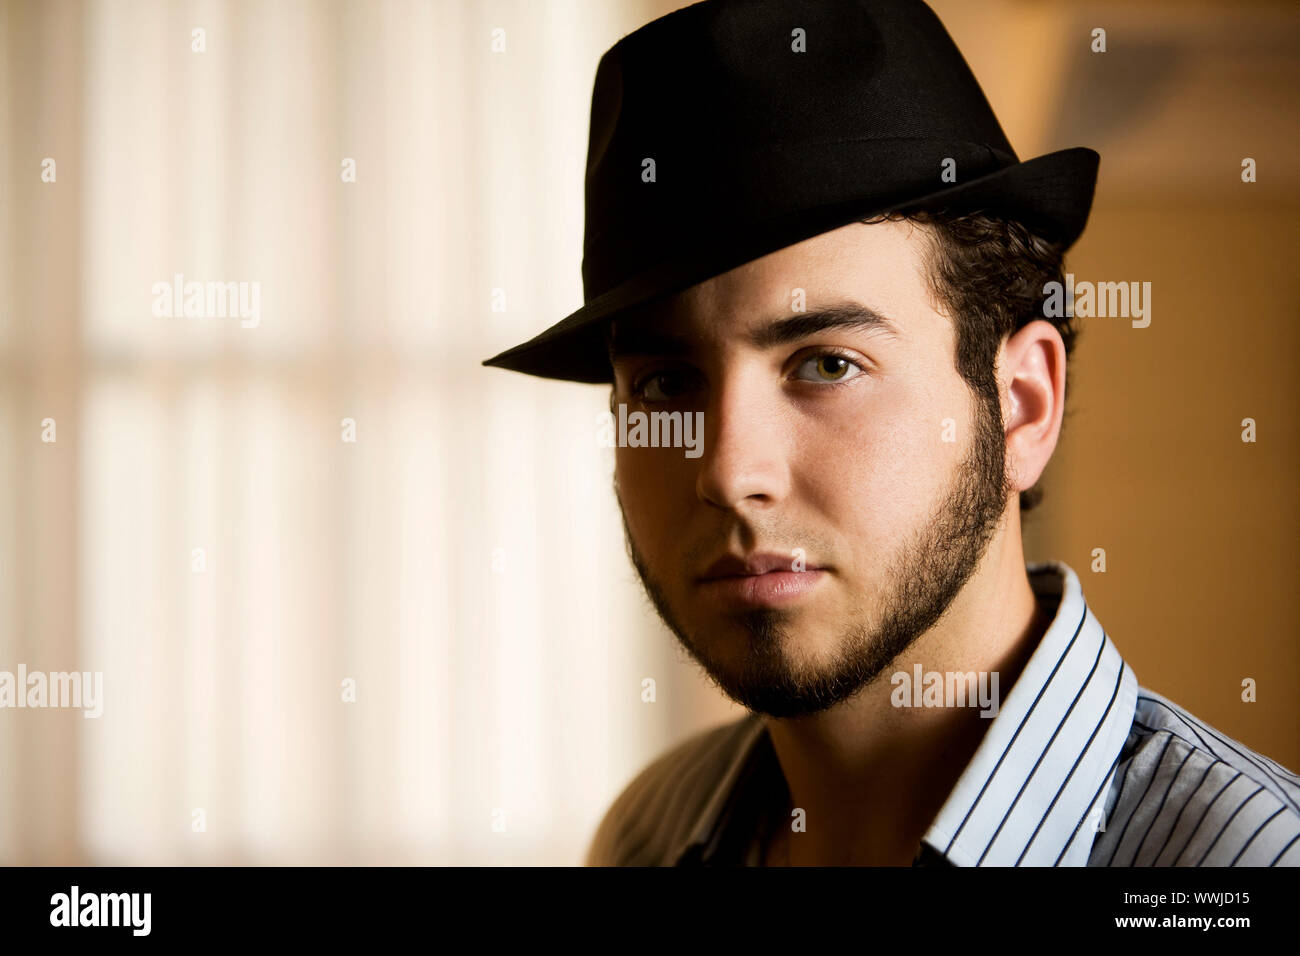 Handsome Young Man Indoors Wearing a Fedora Hat Stock Photo - Alamy